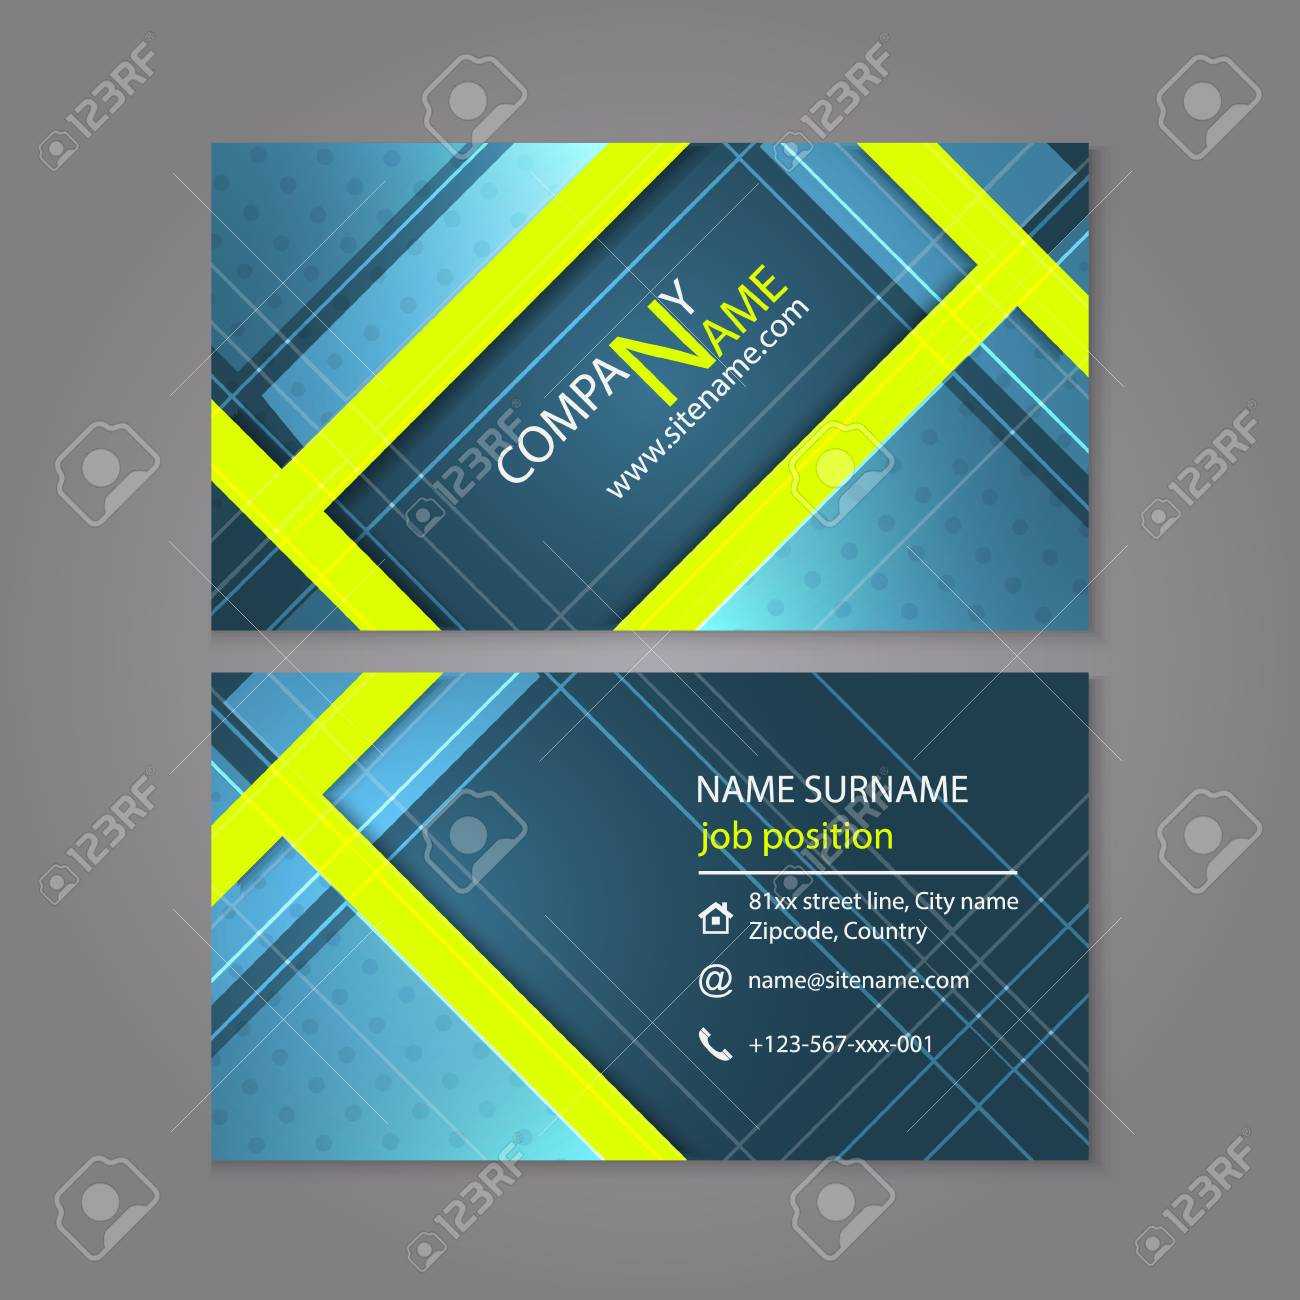 Professional Business Card Template Design Or Visiting Card Set With Regard To Professional Name Card Template